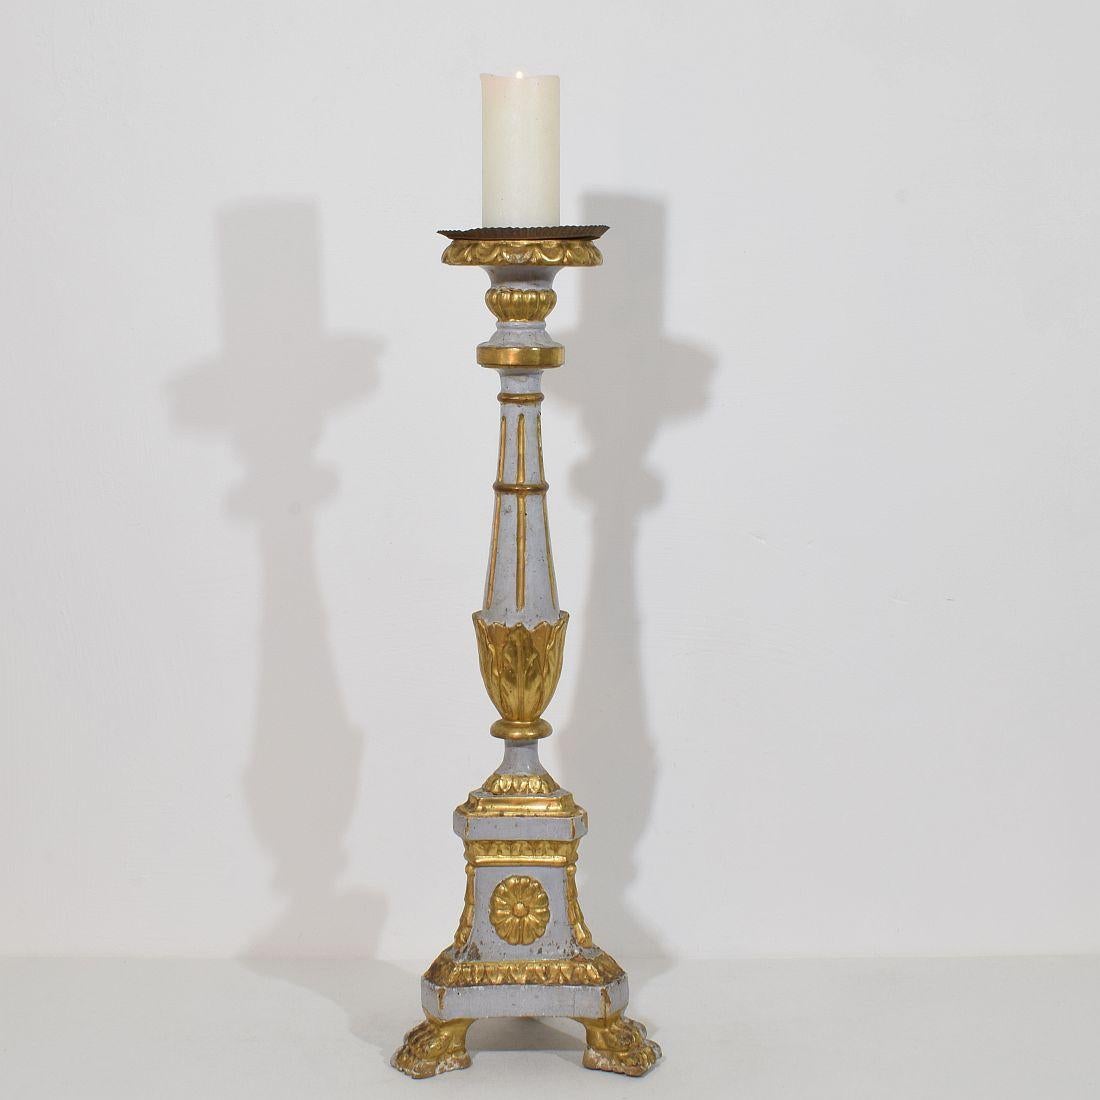  Great wooden candleholder with its original gilding.
Original period piece and rare to find.
Italy, circa 1780-1800.
Weathered and small losses.
Measurements include the metal peak
H:79cm  W:25cm D:24cm 